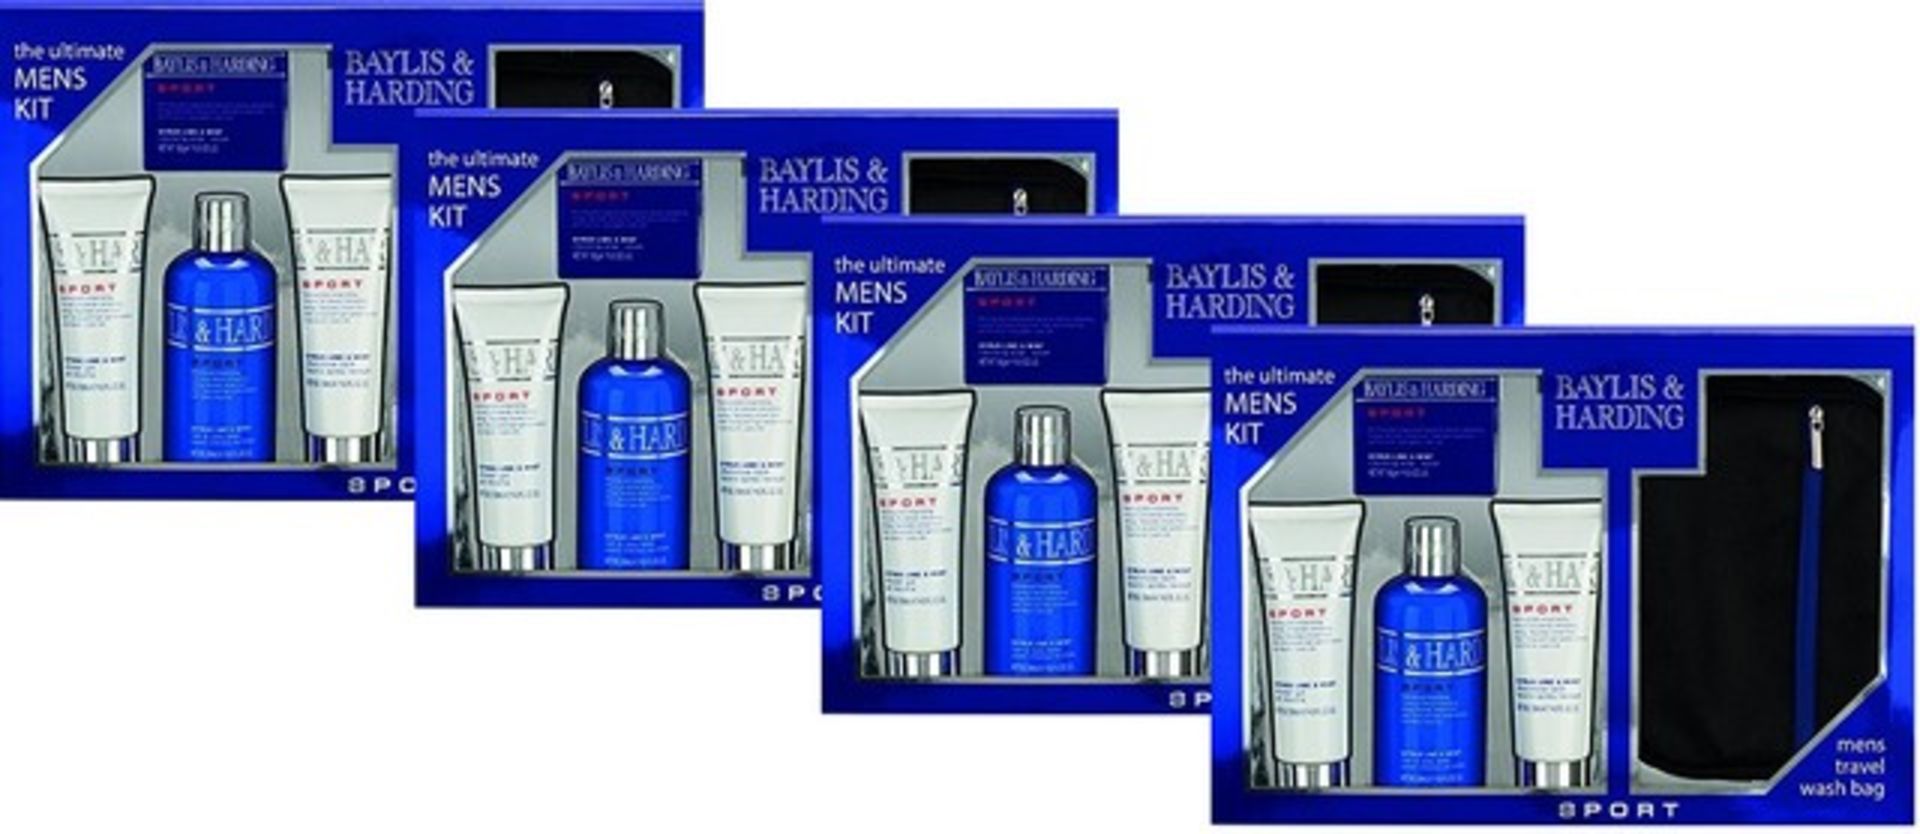 + VAT Brand New Four Gift Sets - Baylis and Harding The Ultimate Men's Kit Including 1 x 300ml Hair